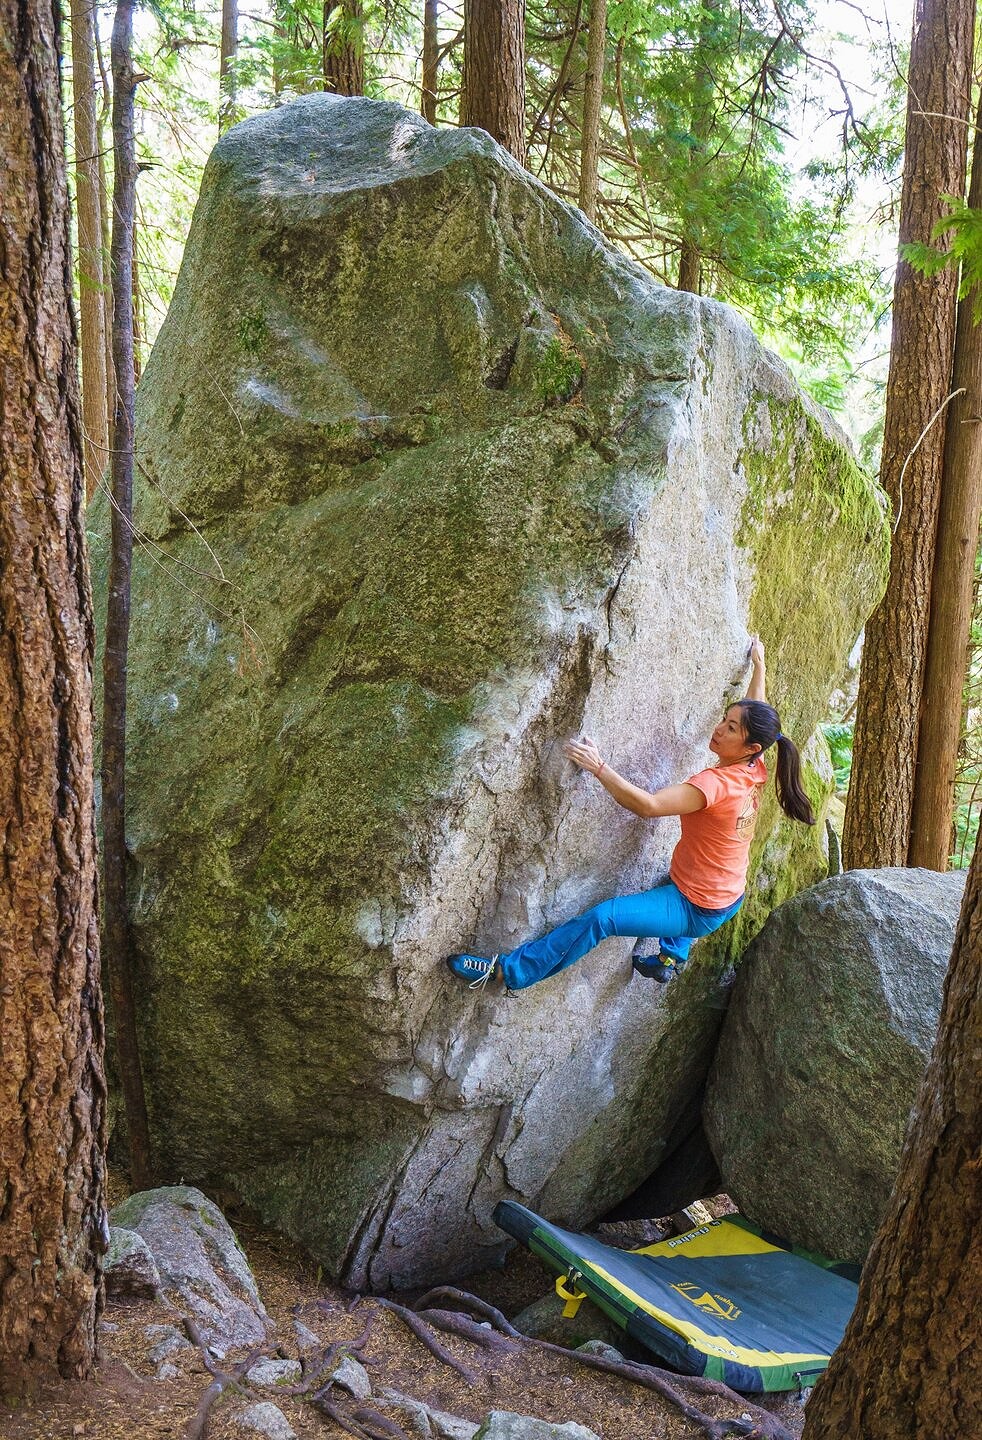 Melodie Meigs bouldering at 4 months pregnant.   © Melodie Meigs